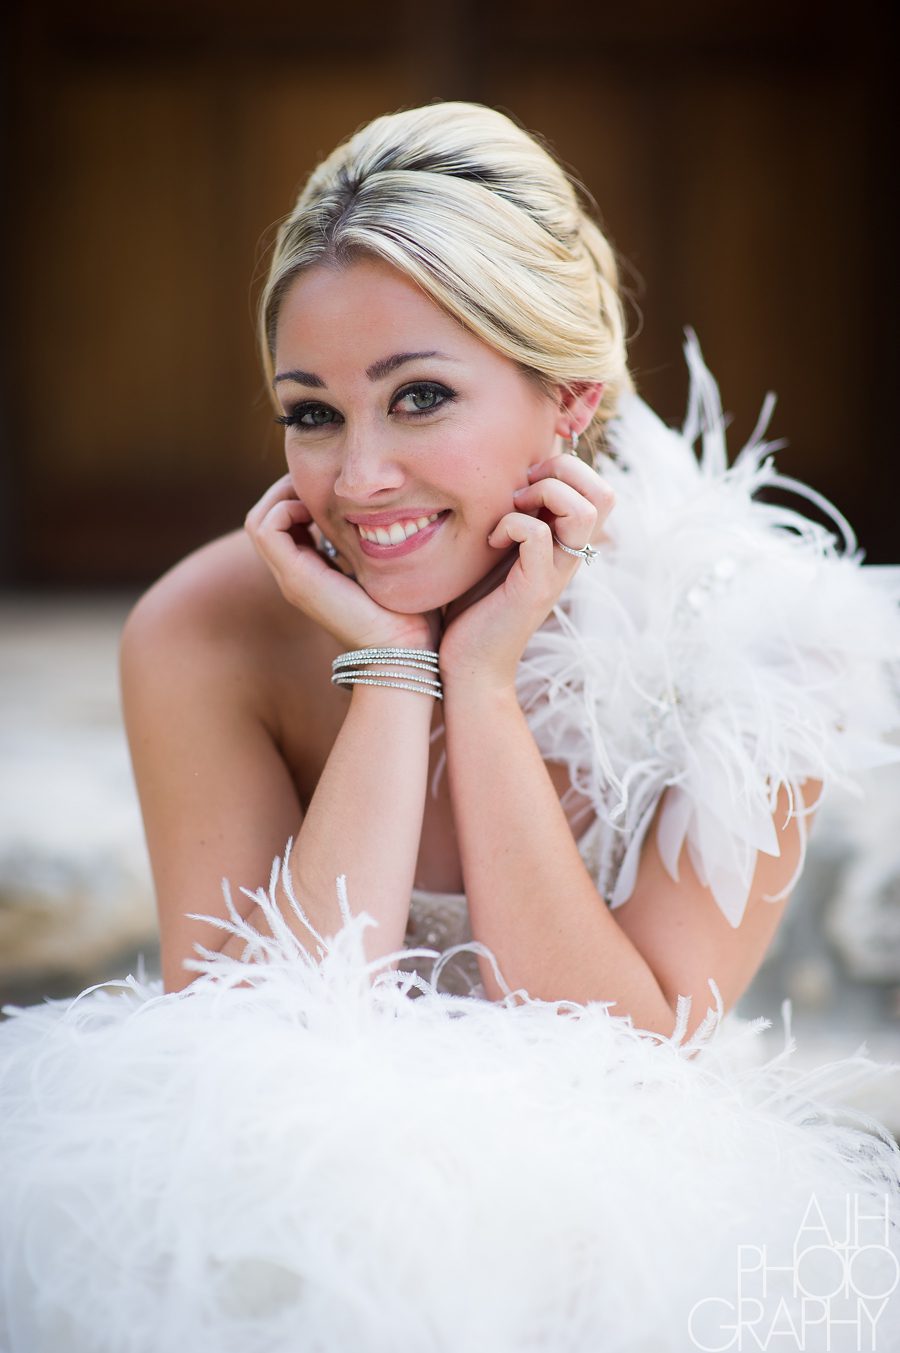 Camp Lucy Bridal Portraits - AJH Photography